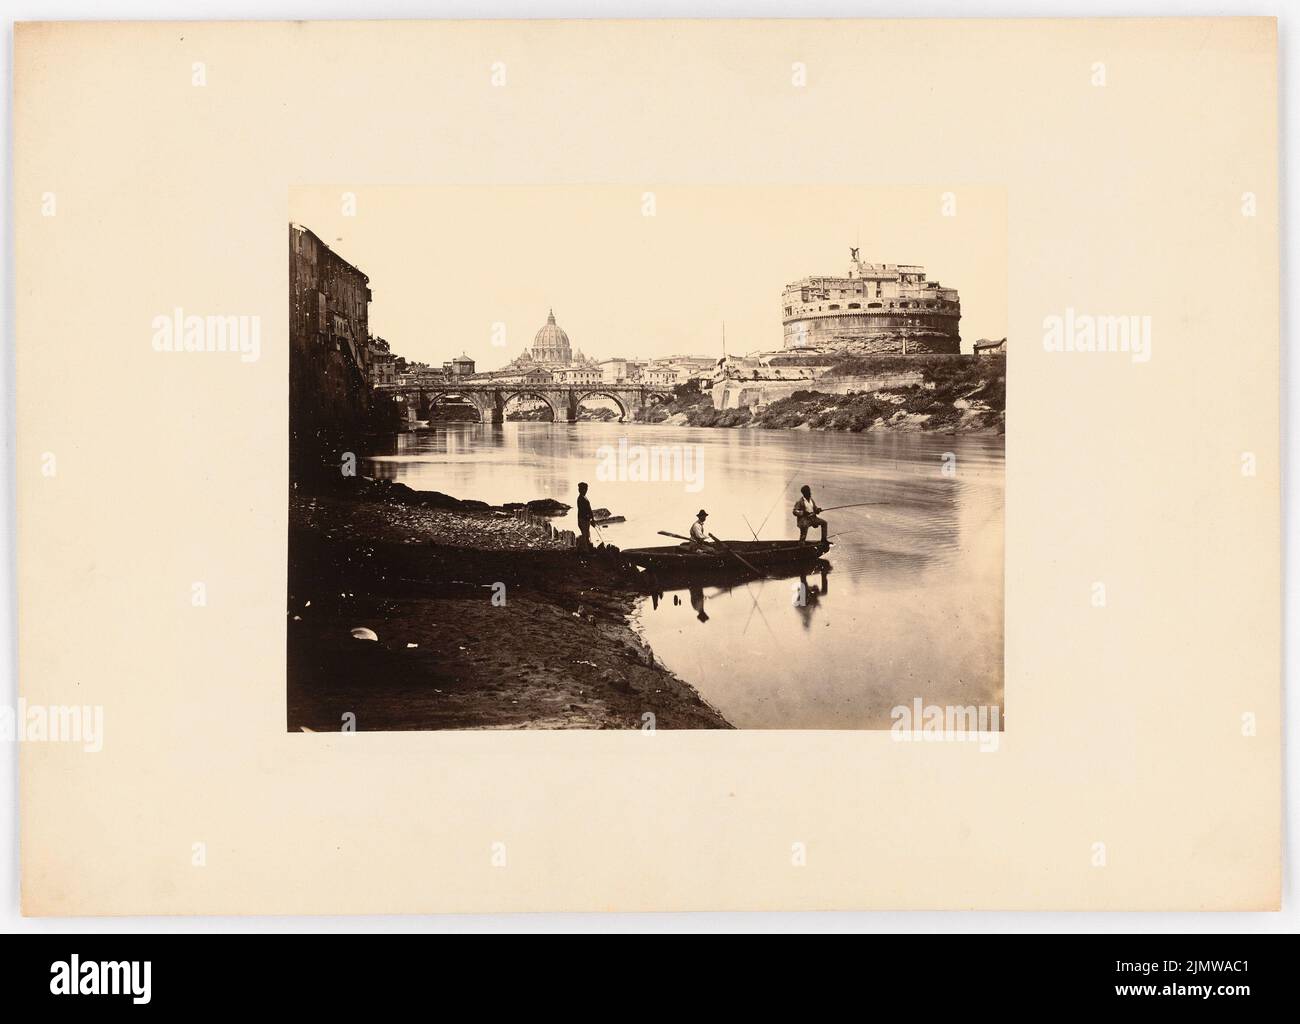 Unknown photographer, view of the Engelsburg, Engelsbrücke, Petersdom in Rome (without dat.): View of the city of Rome from the Tiber to the Engelsburg, Engelsbrücke and St. Peter's Basilica. Photo on paper, 33.2 x 46.2 cm (including scan edges) unbek. Fotograf : Ansicht der Engelsburg, Engelsbrücke, Petersdom, Rom Stock Photo